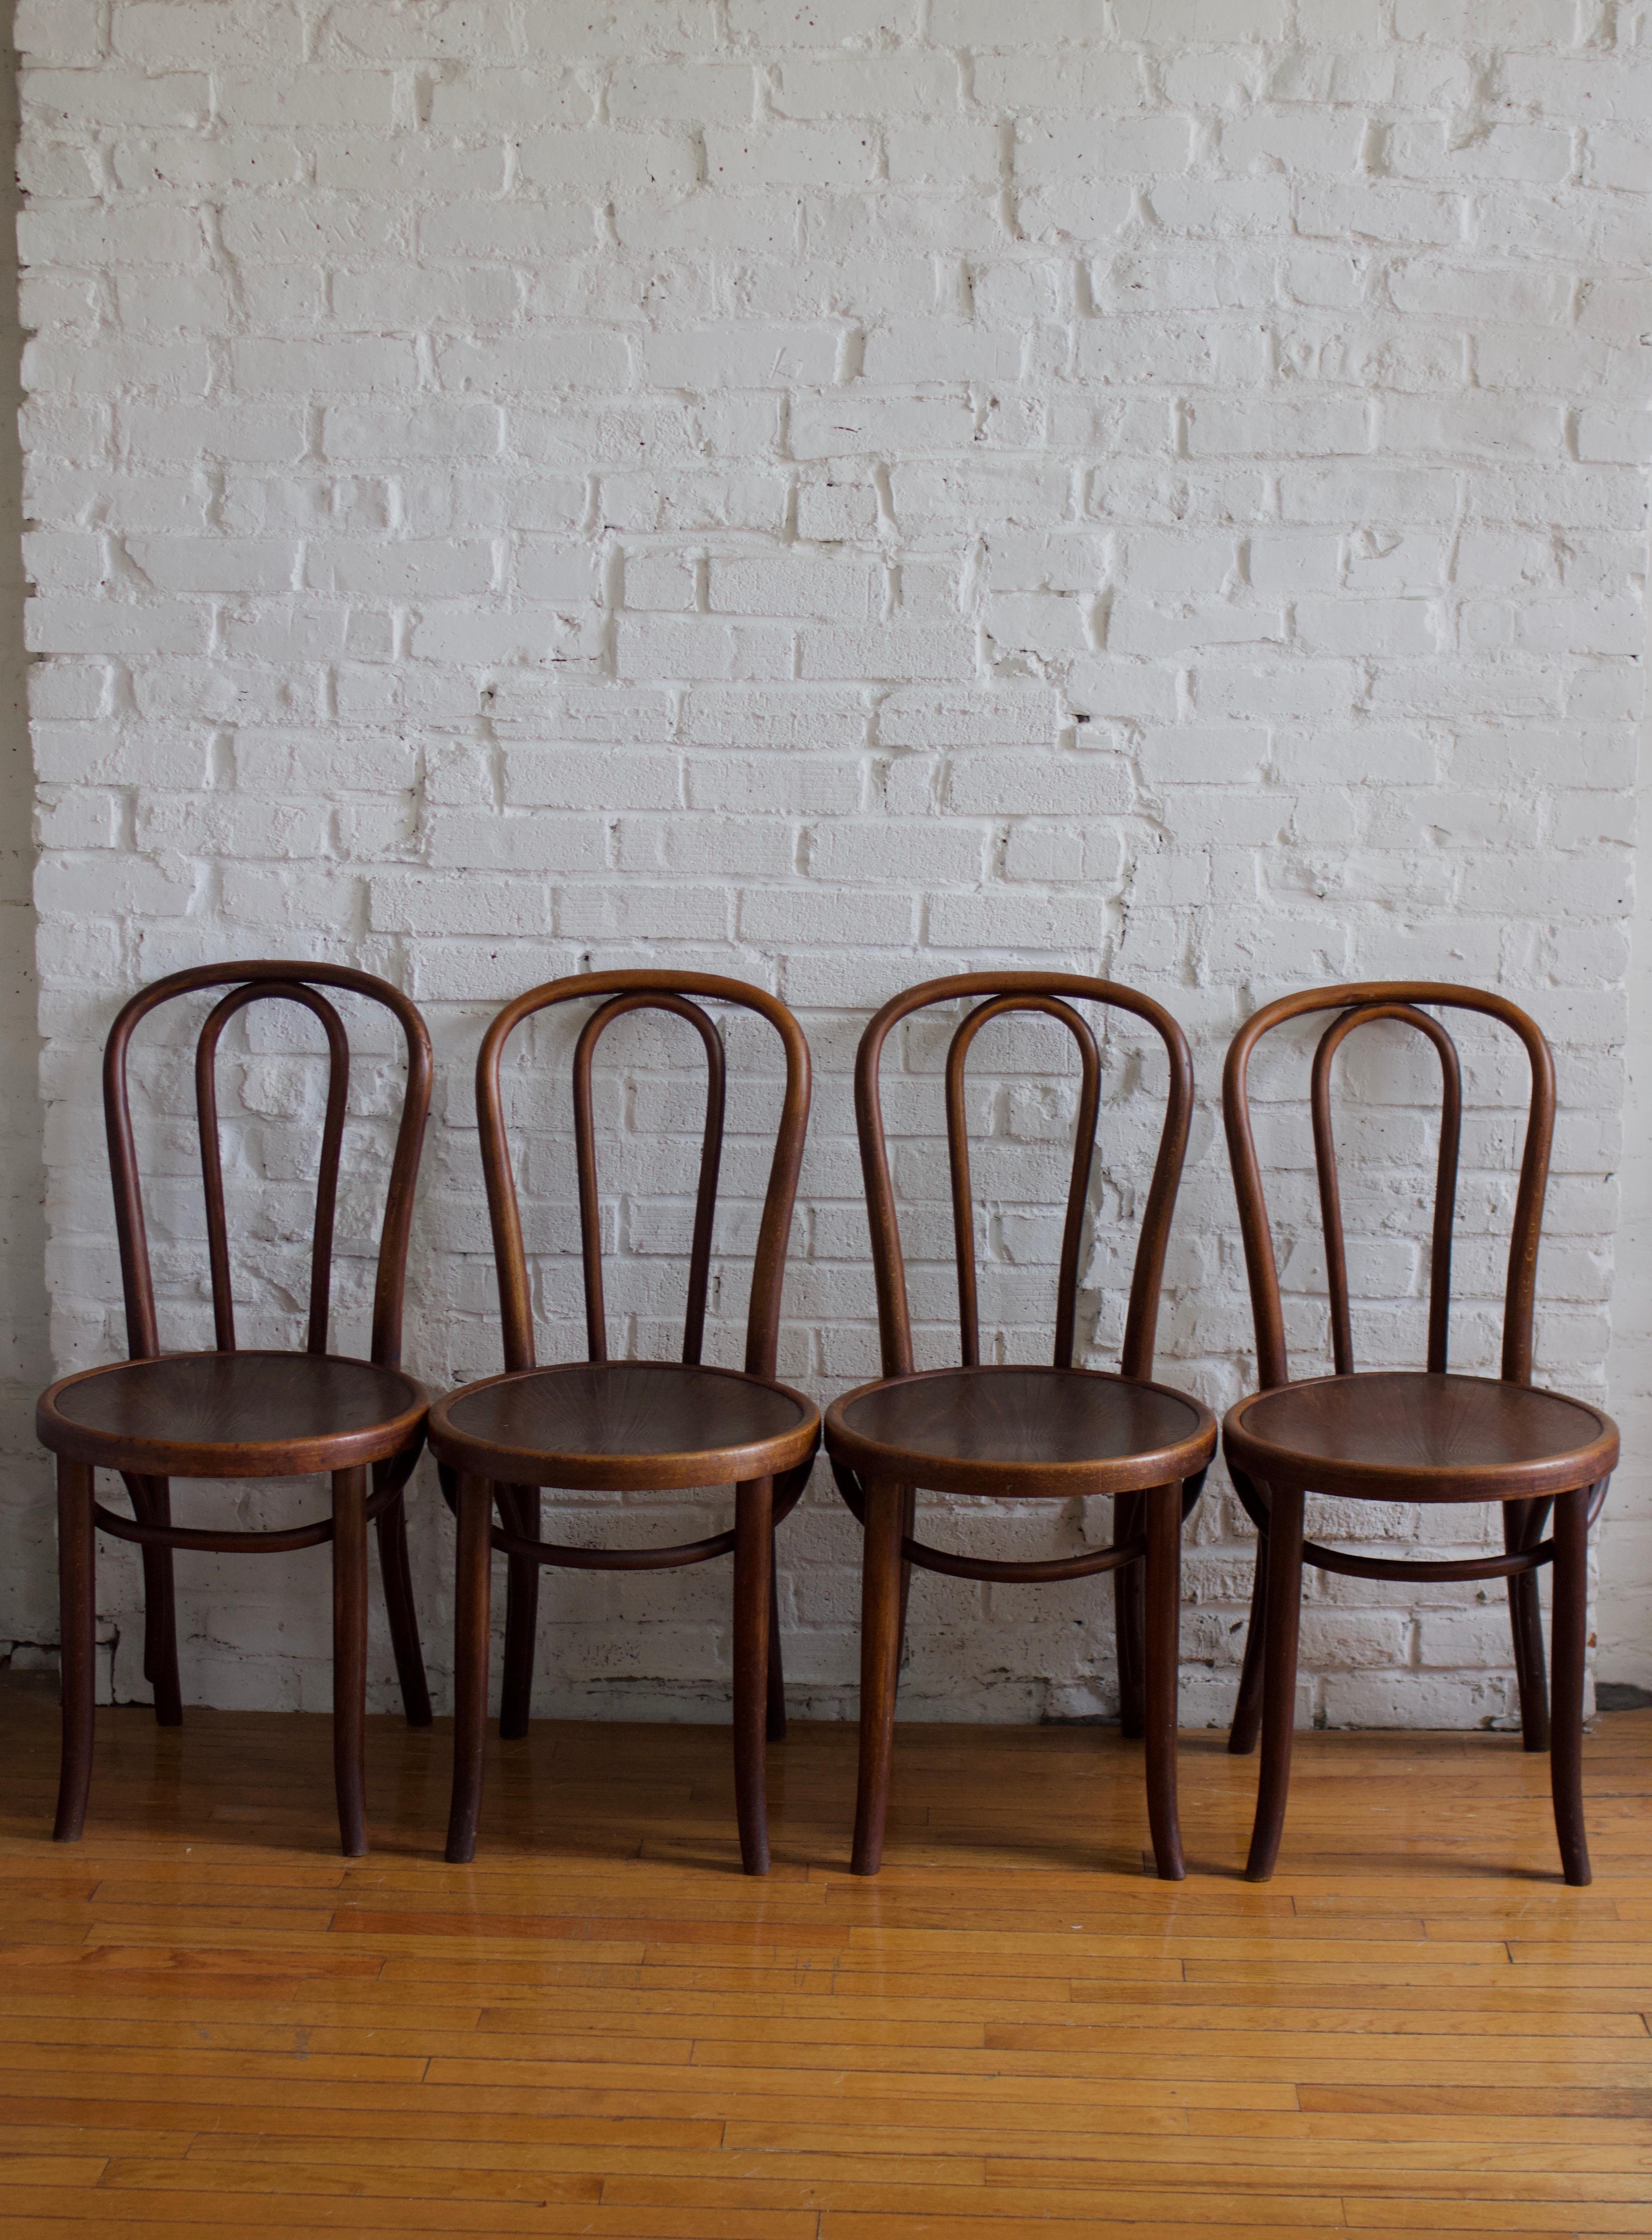 Set of four vintage No. 18 Bentwood chairs by Michael Thonet for ZPM Radomsko. Designed by Michael Thonet and produced by ZPM Rodomsko in Poland, which was a former Thonet factory until it was nationalized after WWII.

These chairs are made of